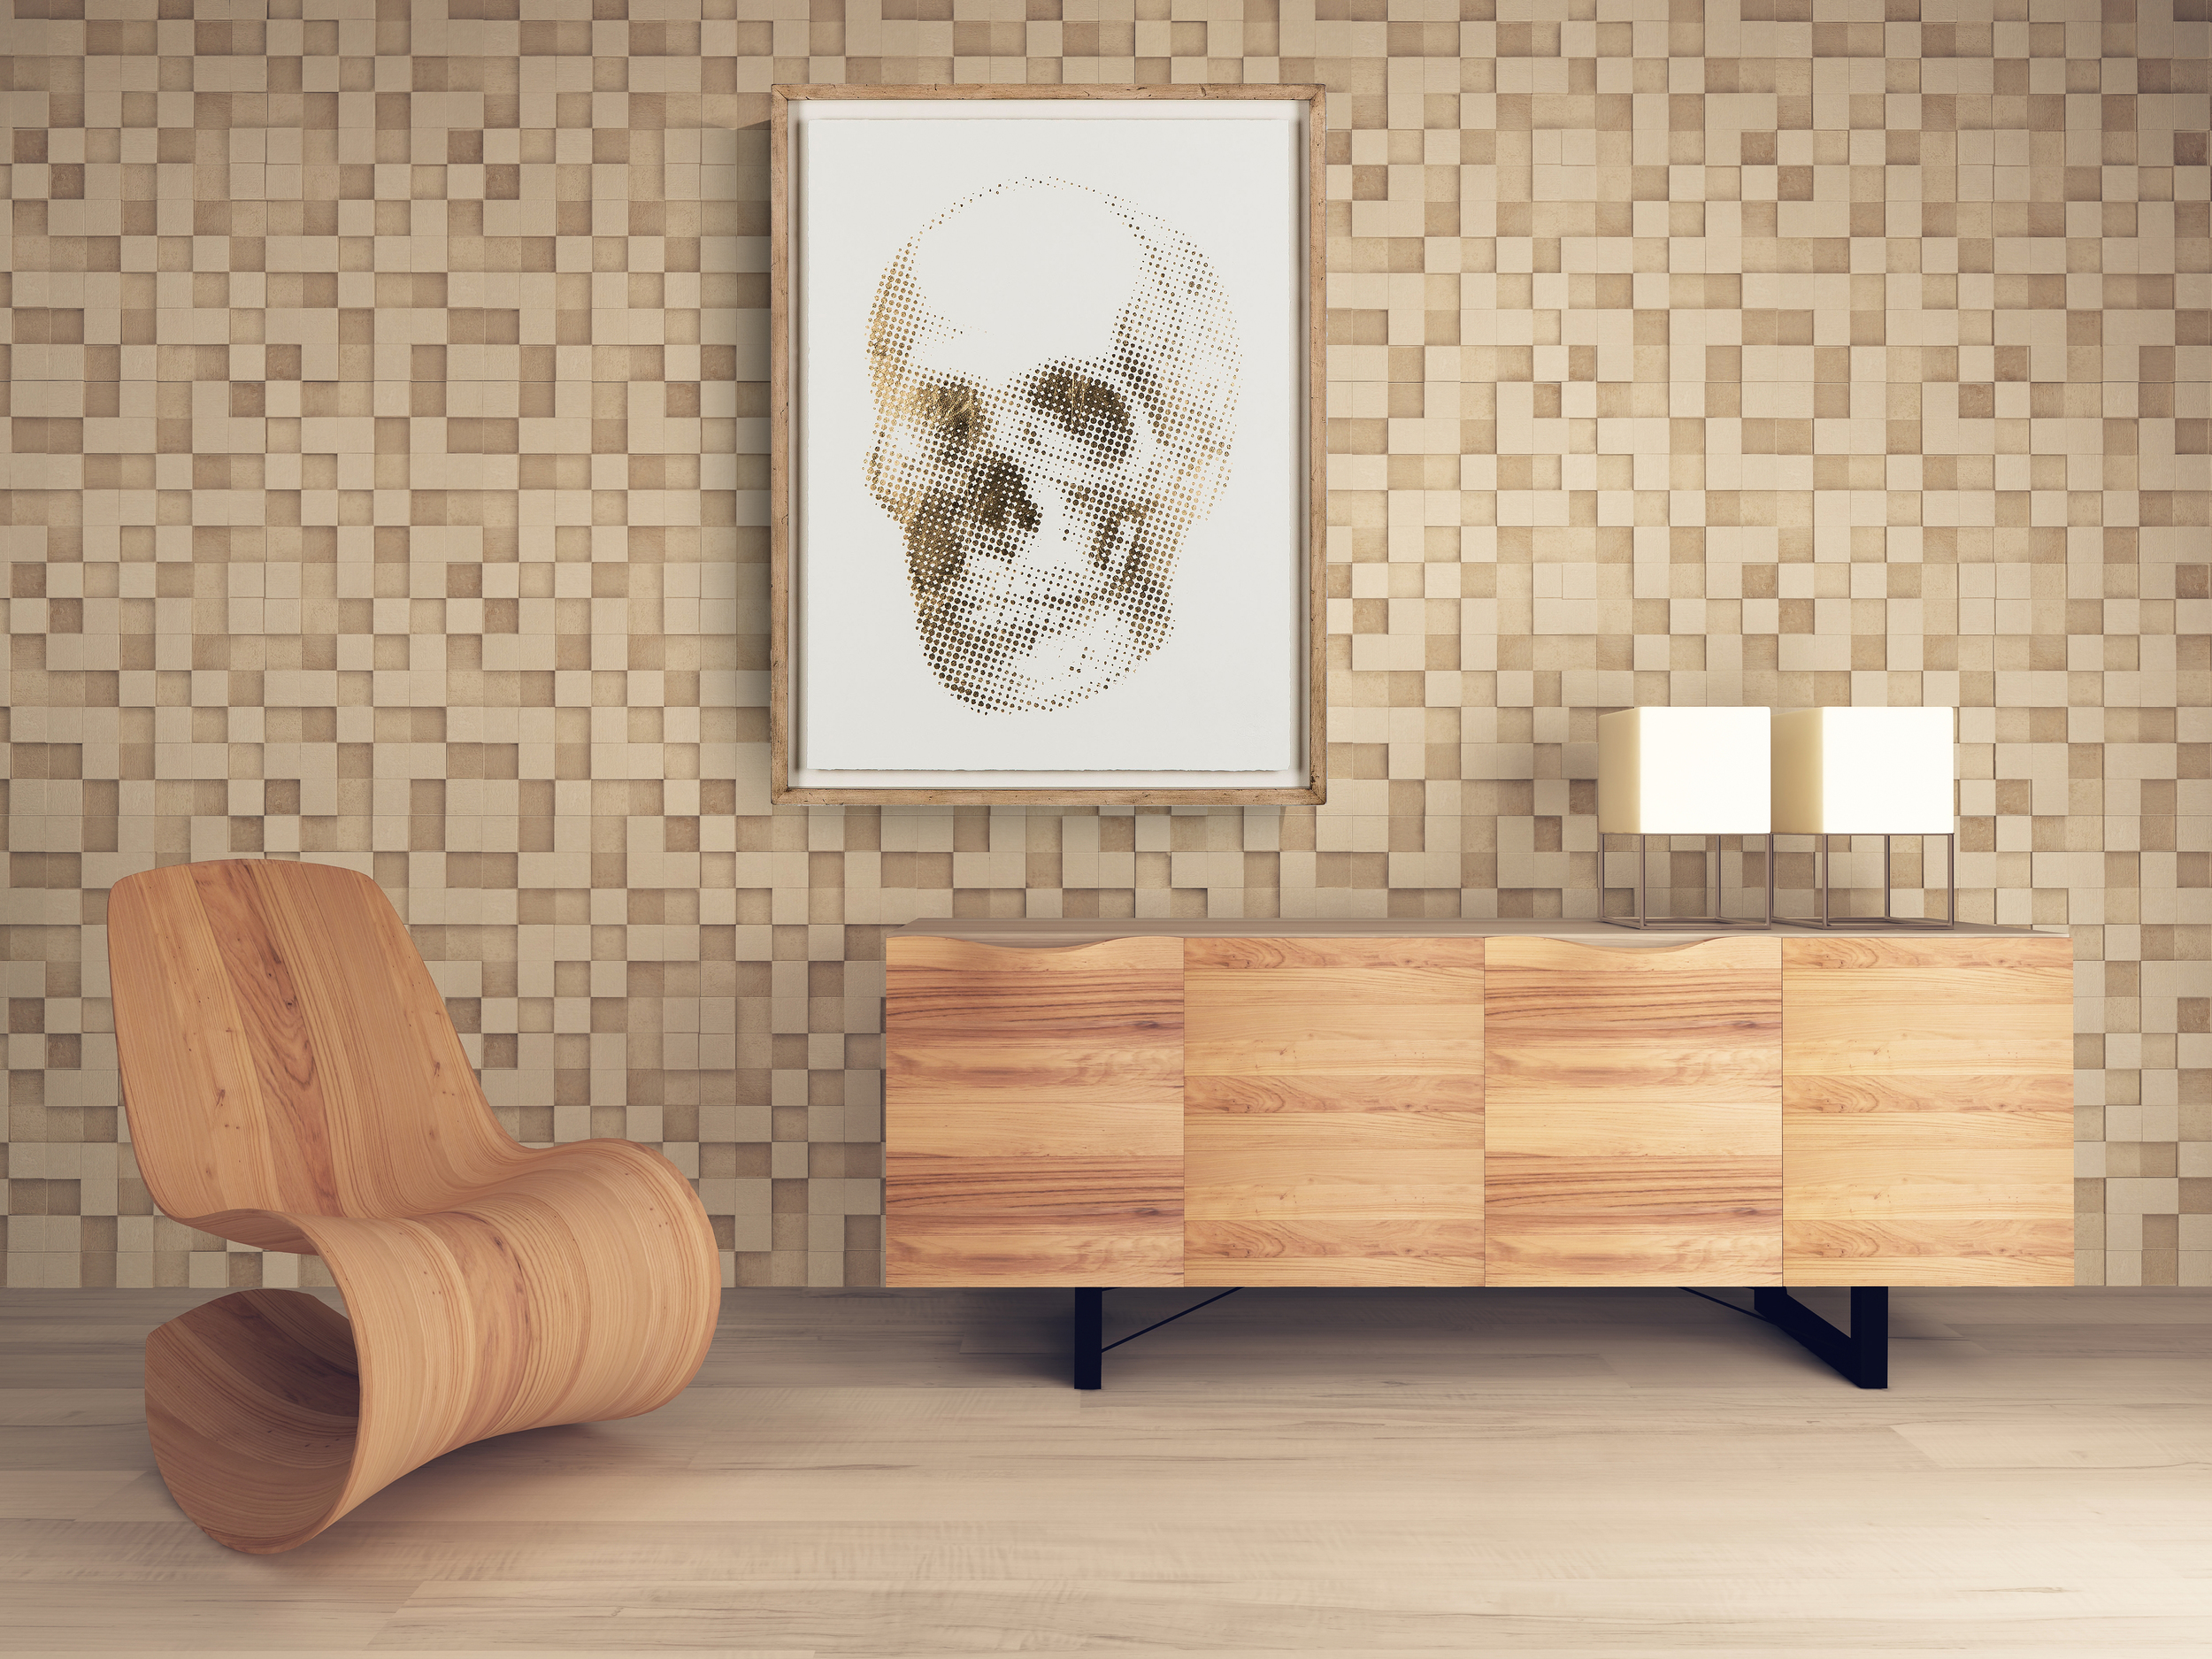 Coup&Co Room with GOLD SKULL.jpg